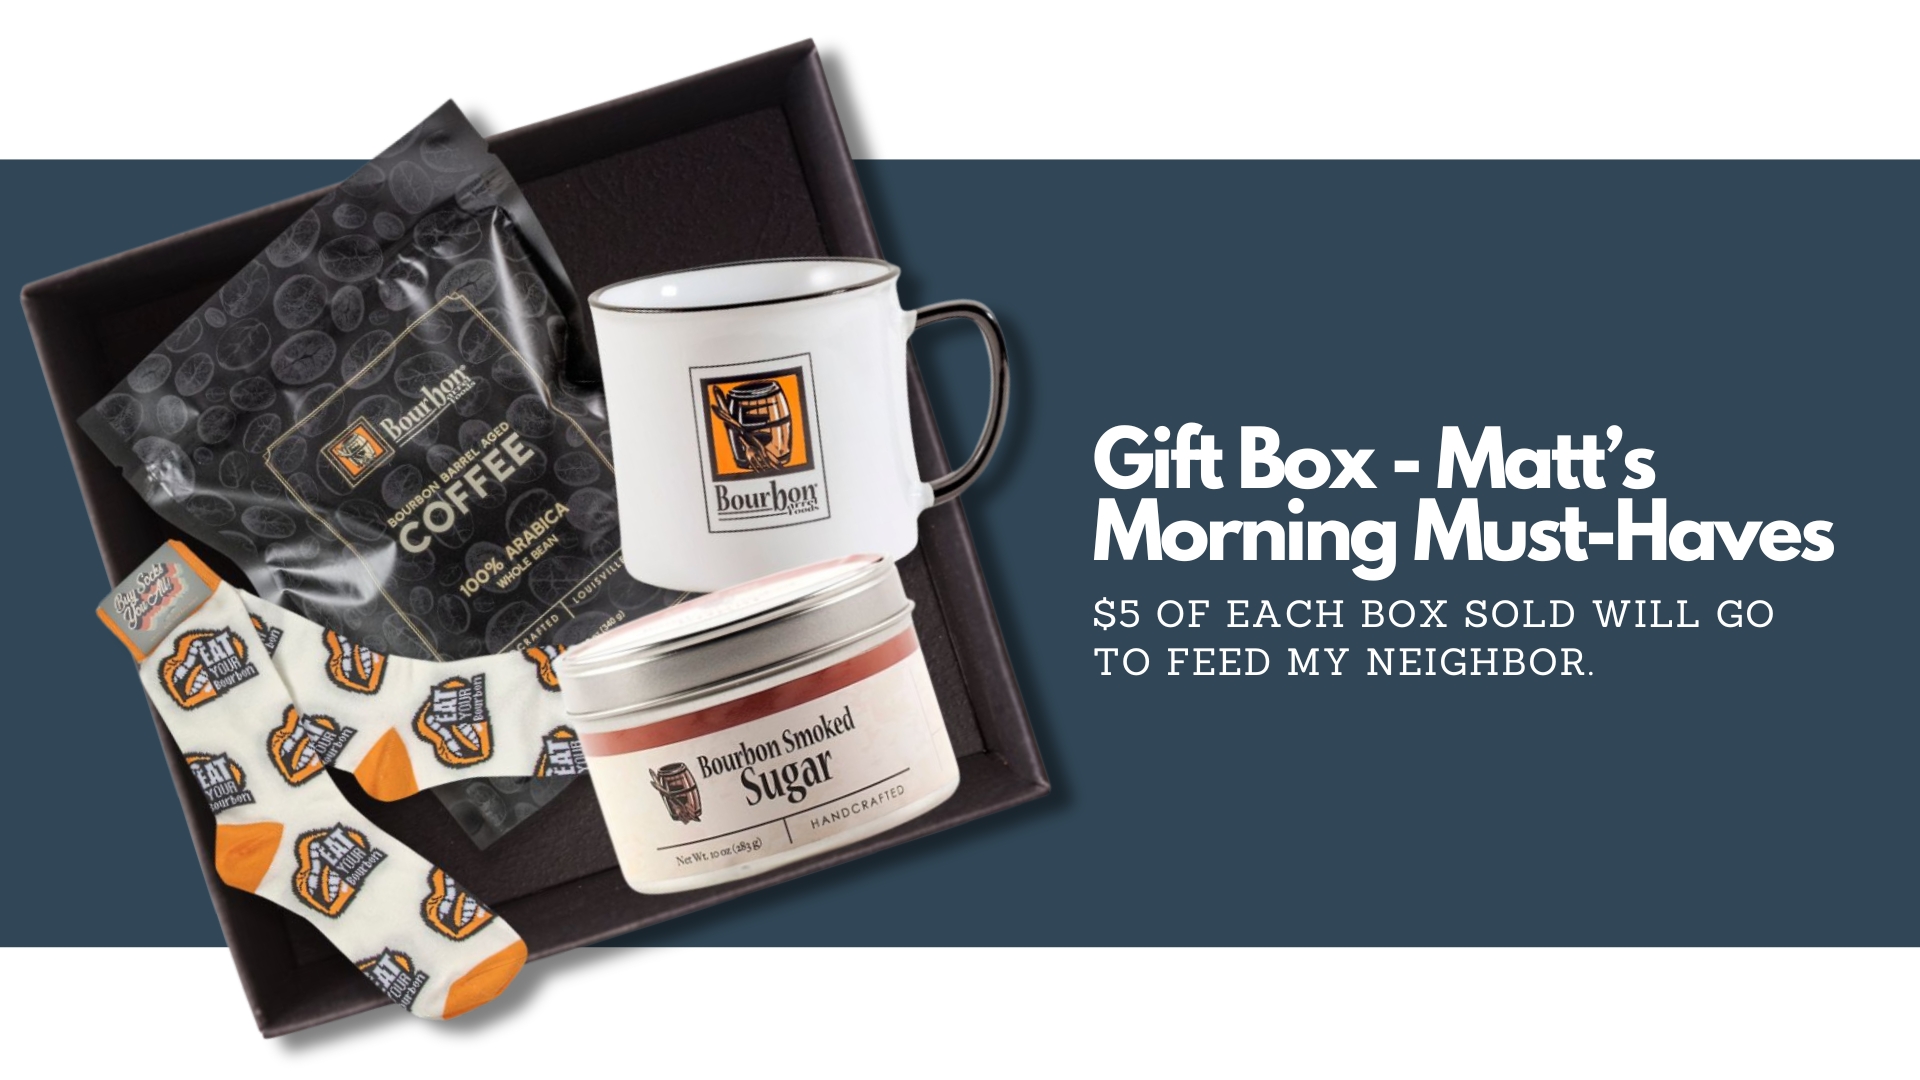 GIFT BOX – Matt’s Morning Must-Haves $55.00 and $5 goes to the charity Feed My Neighbor